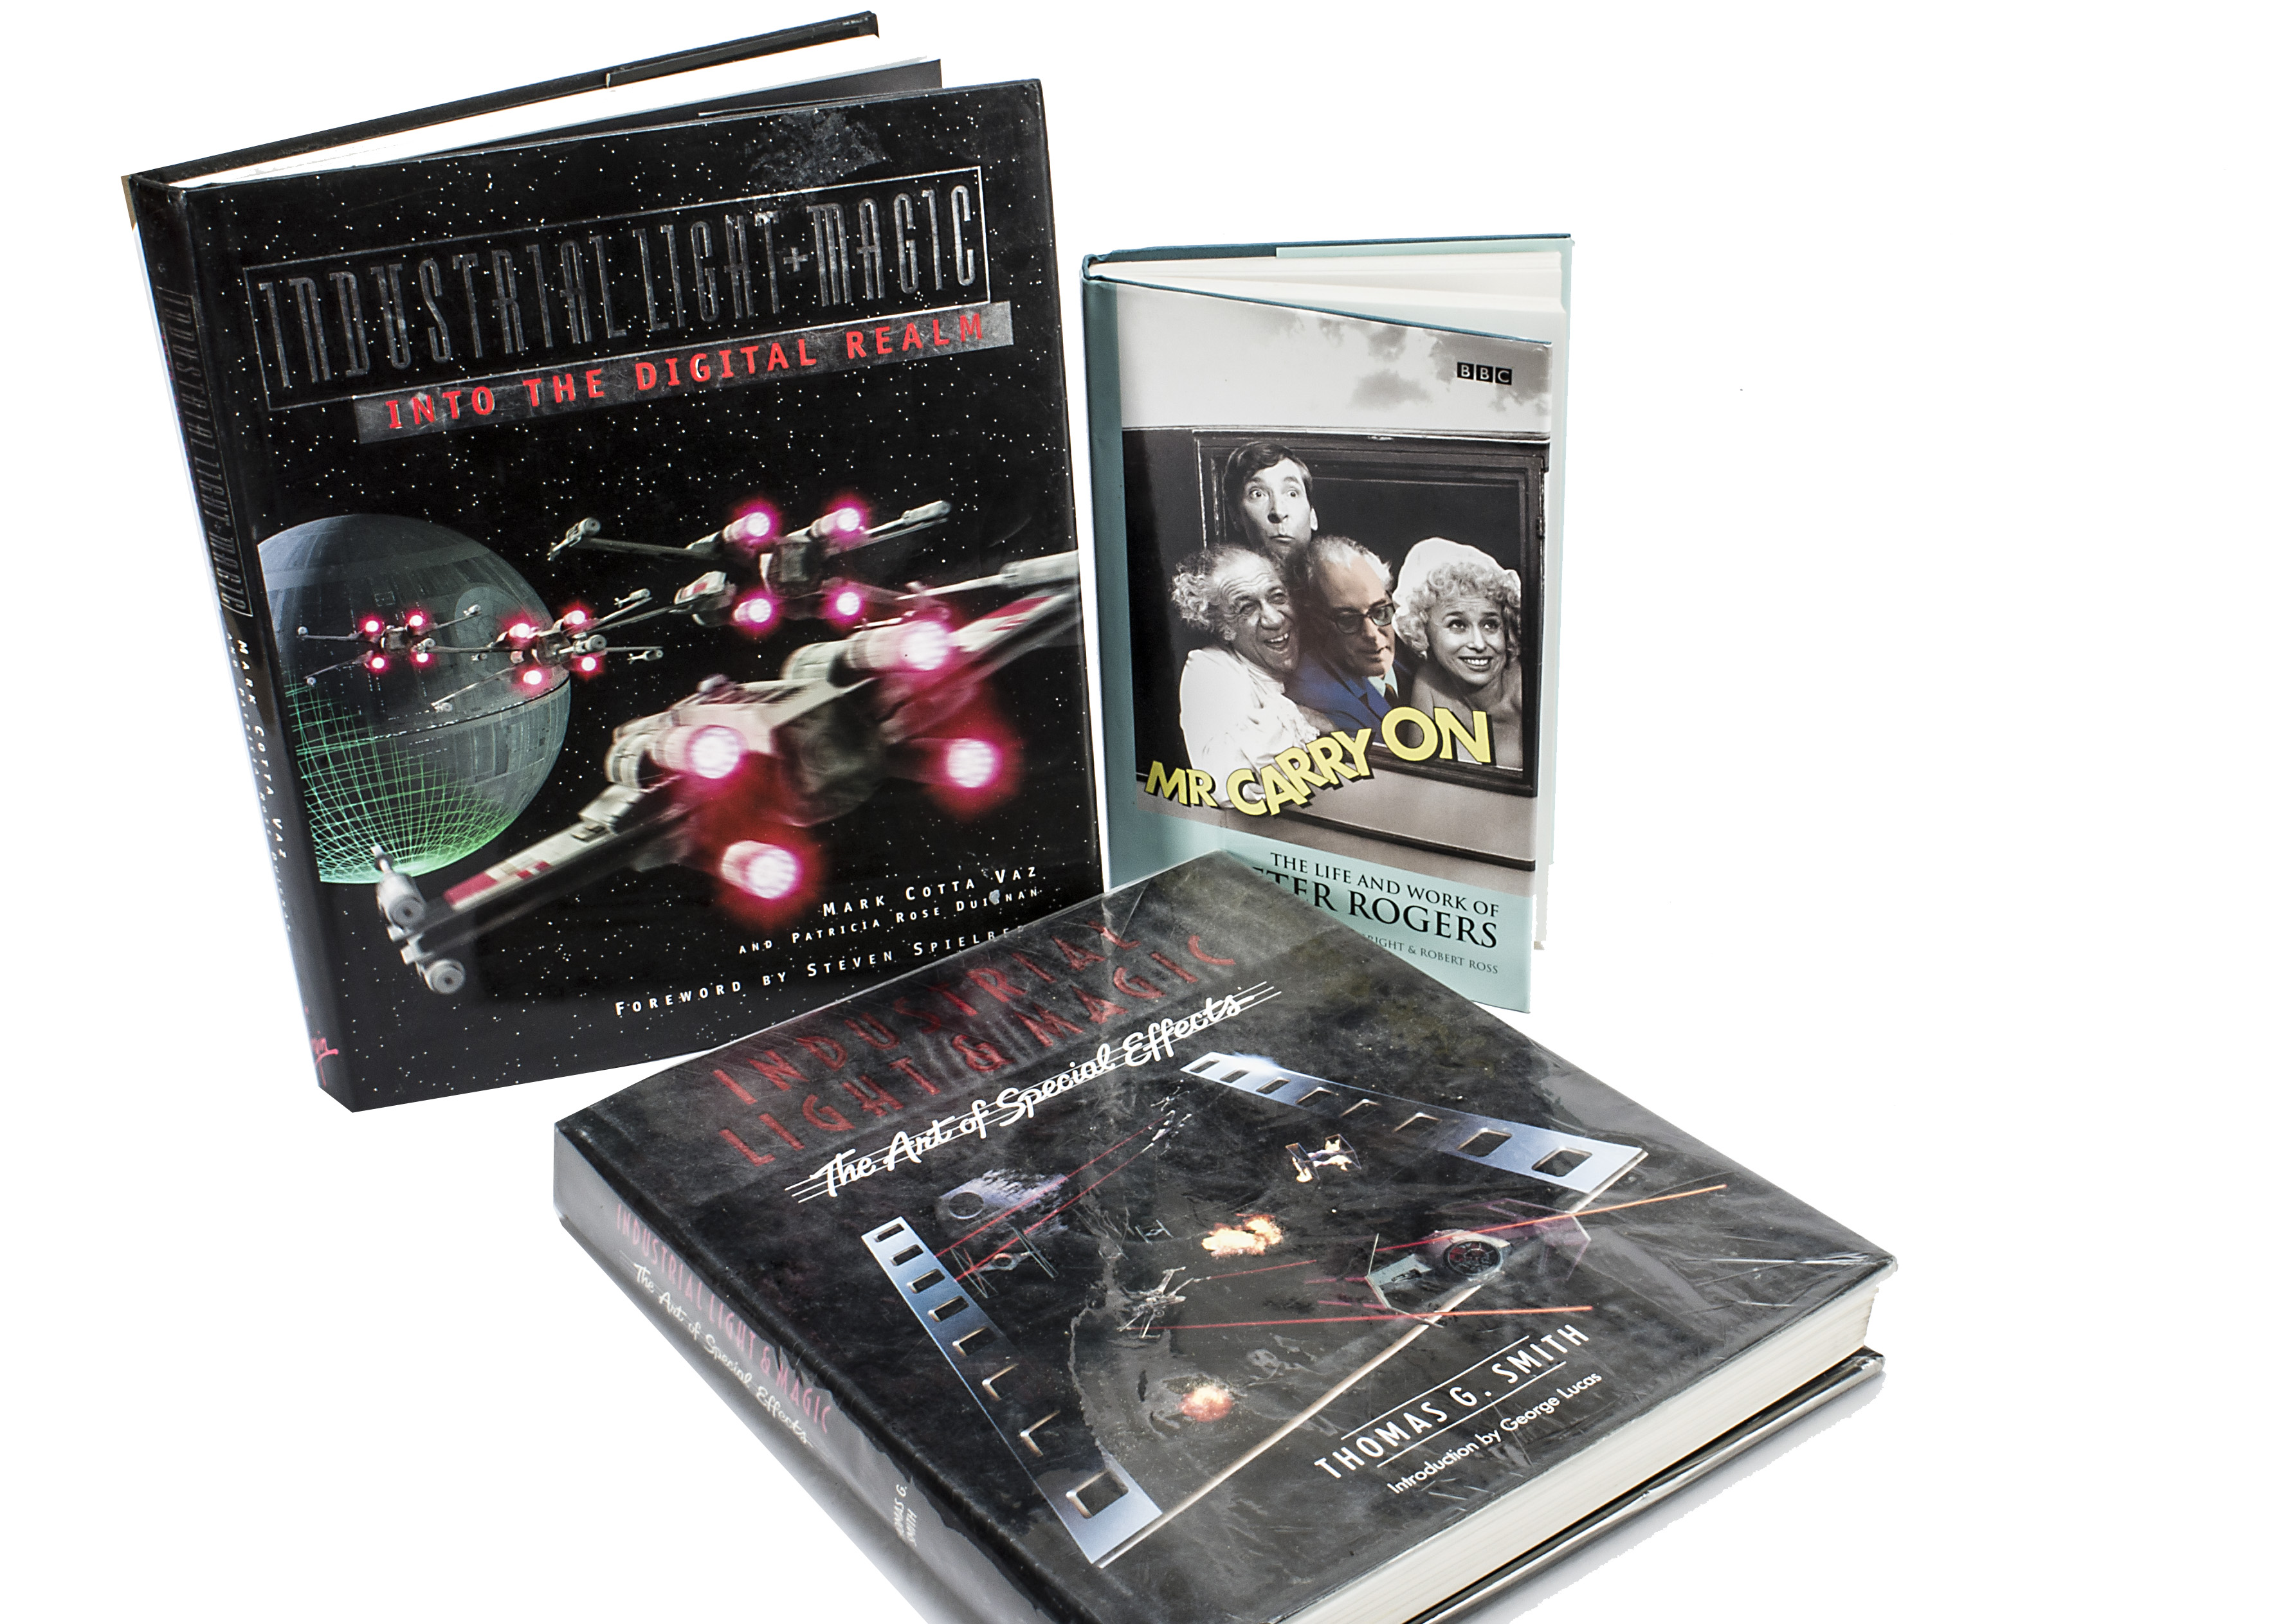 Industrial Light & Magic Film Books, Industrial Light + Magic Books: 'The Art of Special Effects'